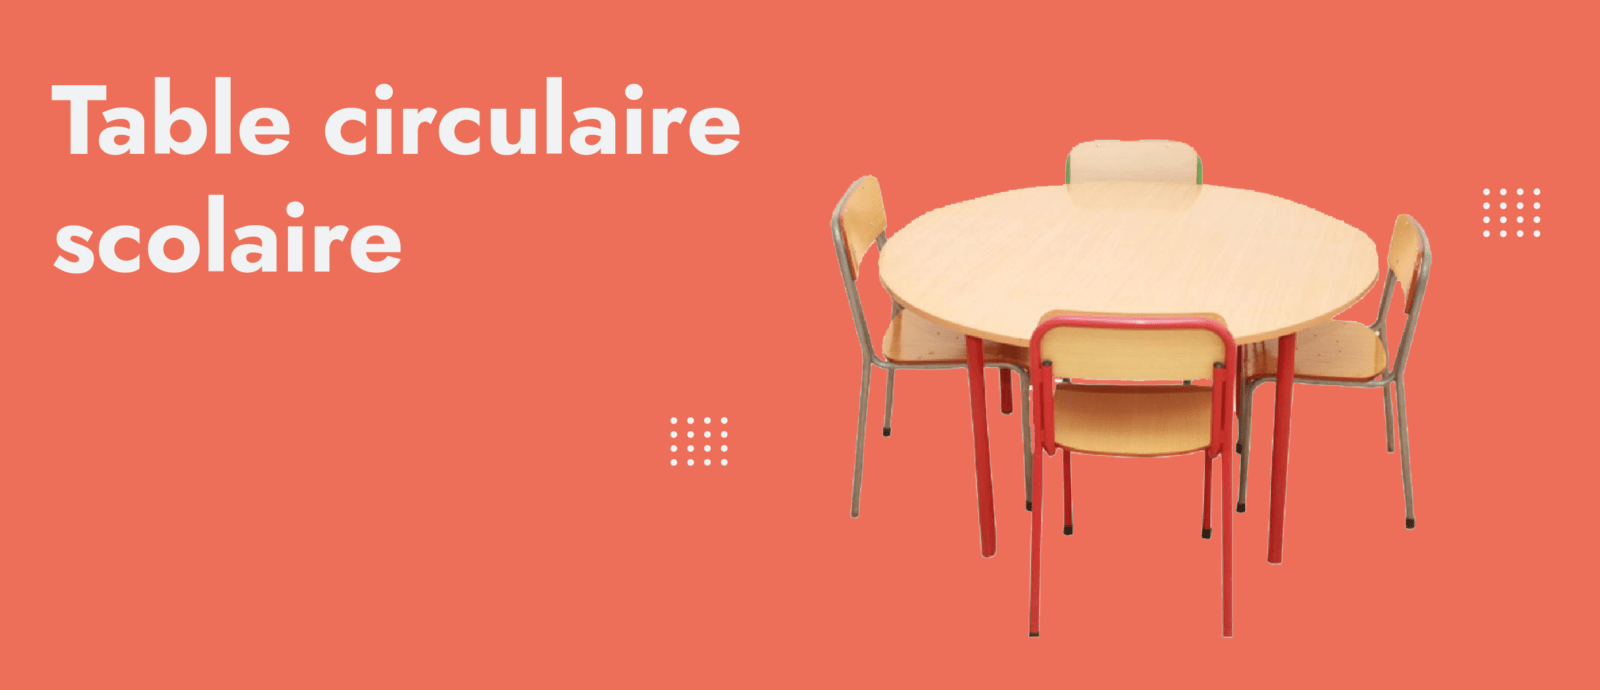 table circulaire scolaire